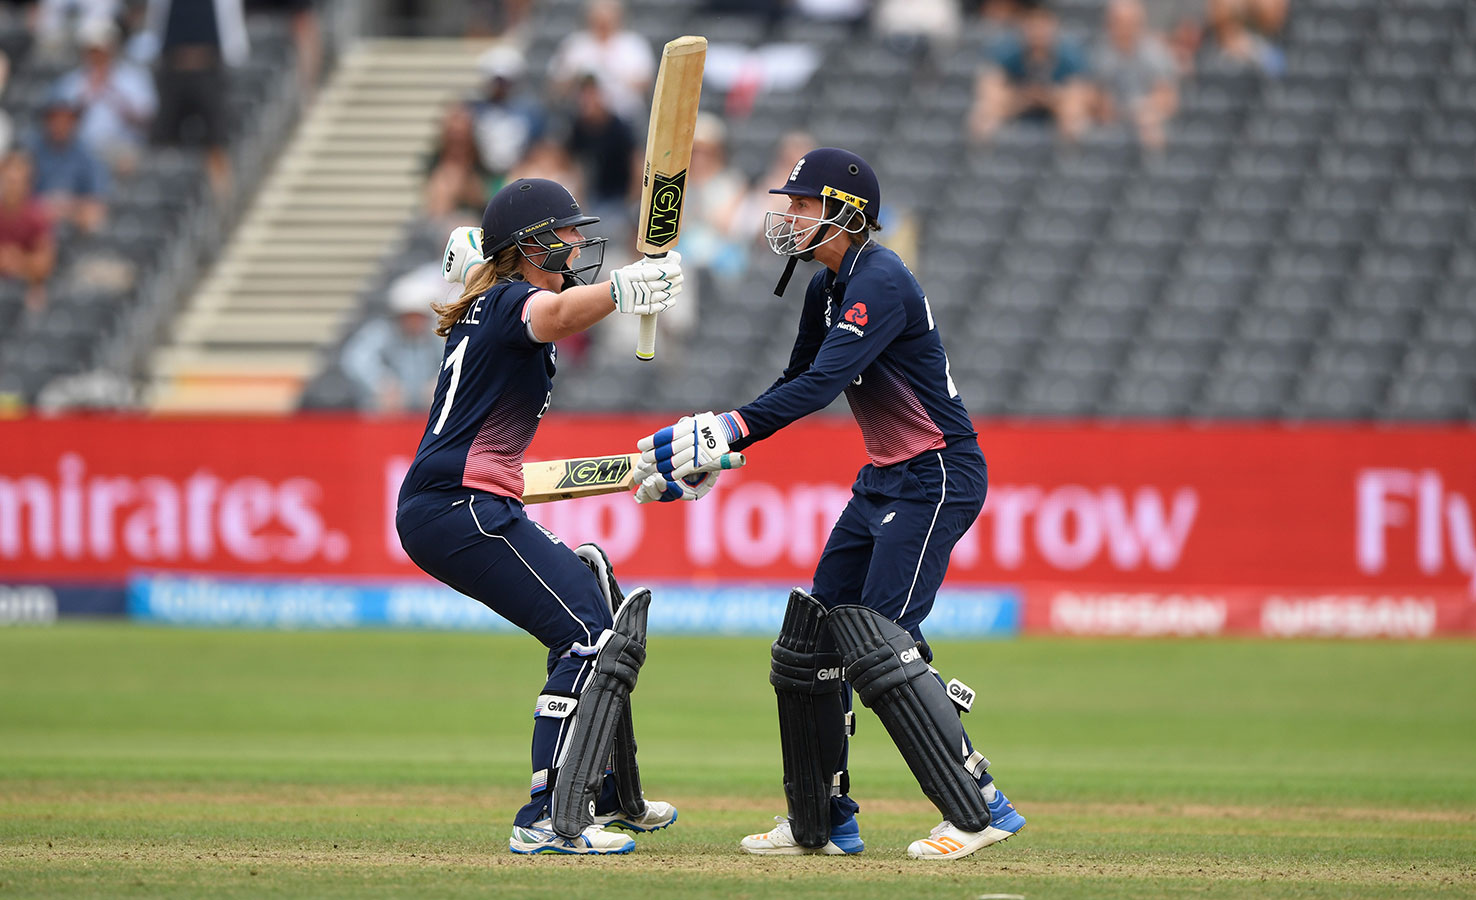 Anya Shrubsole and Jenny Gunn carried England into the final in a tense last-over finish at Bristol